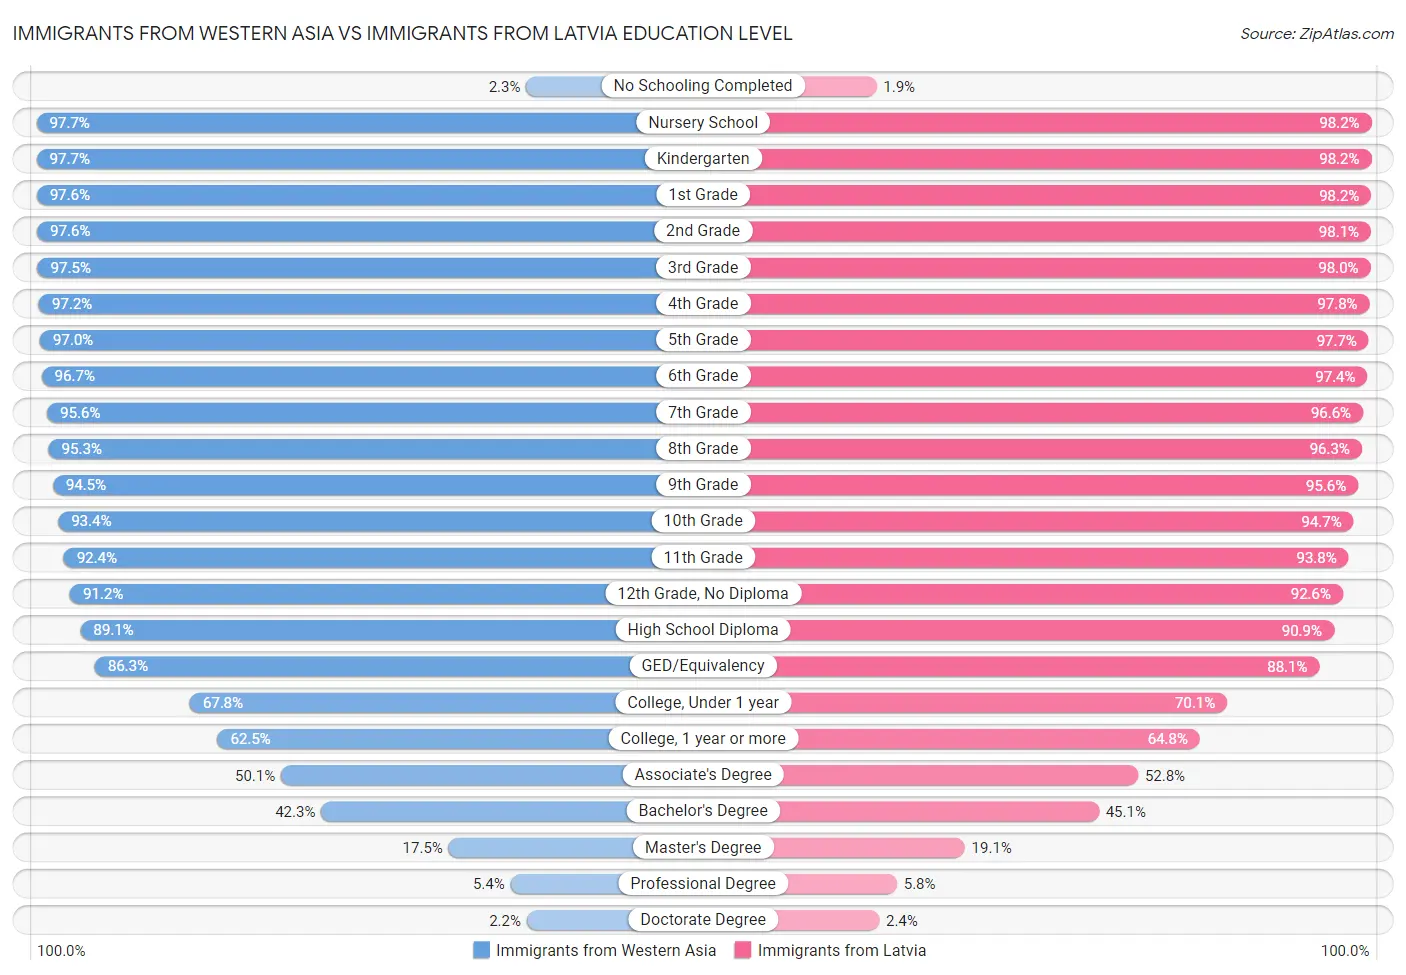 Immigrants from Western Asia vs Immigrants from Latvia Education Level